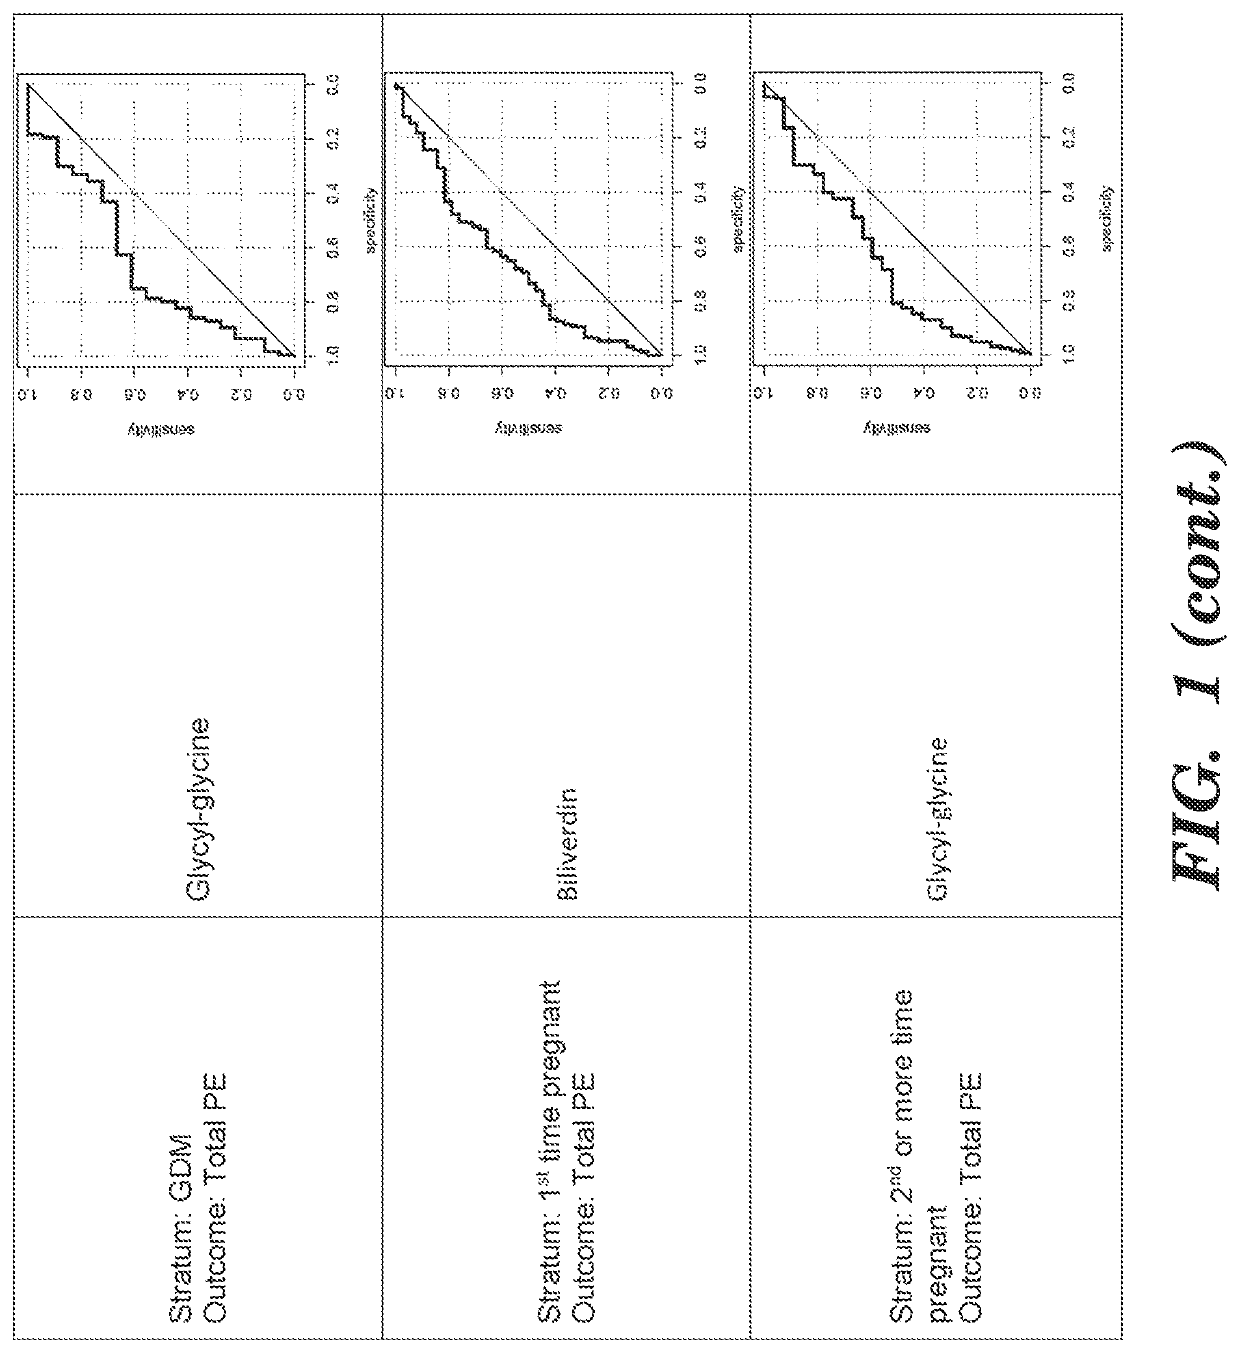 Detection of risk of pre-eclampsia in obese pregnant women